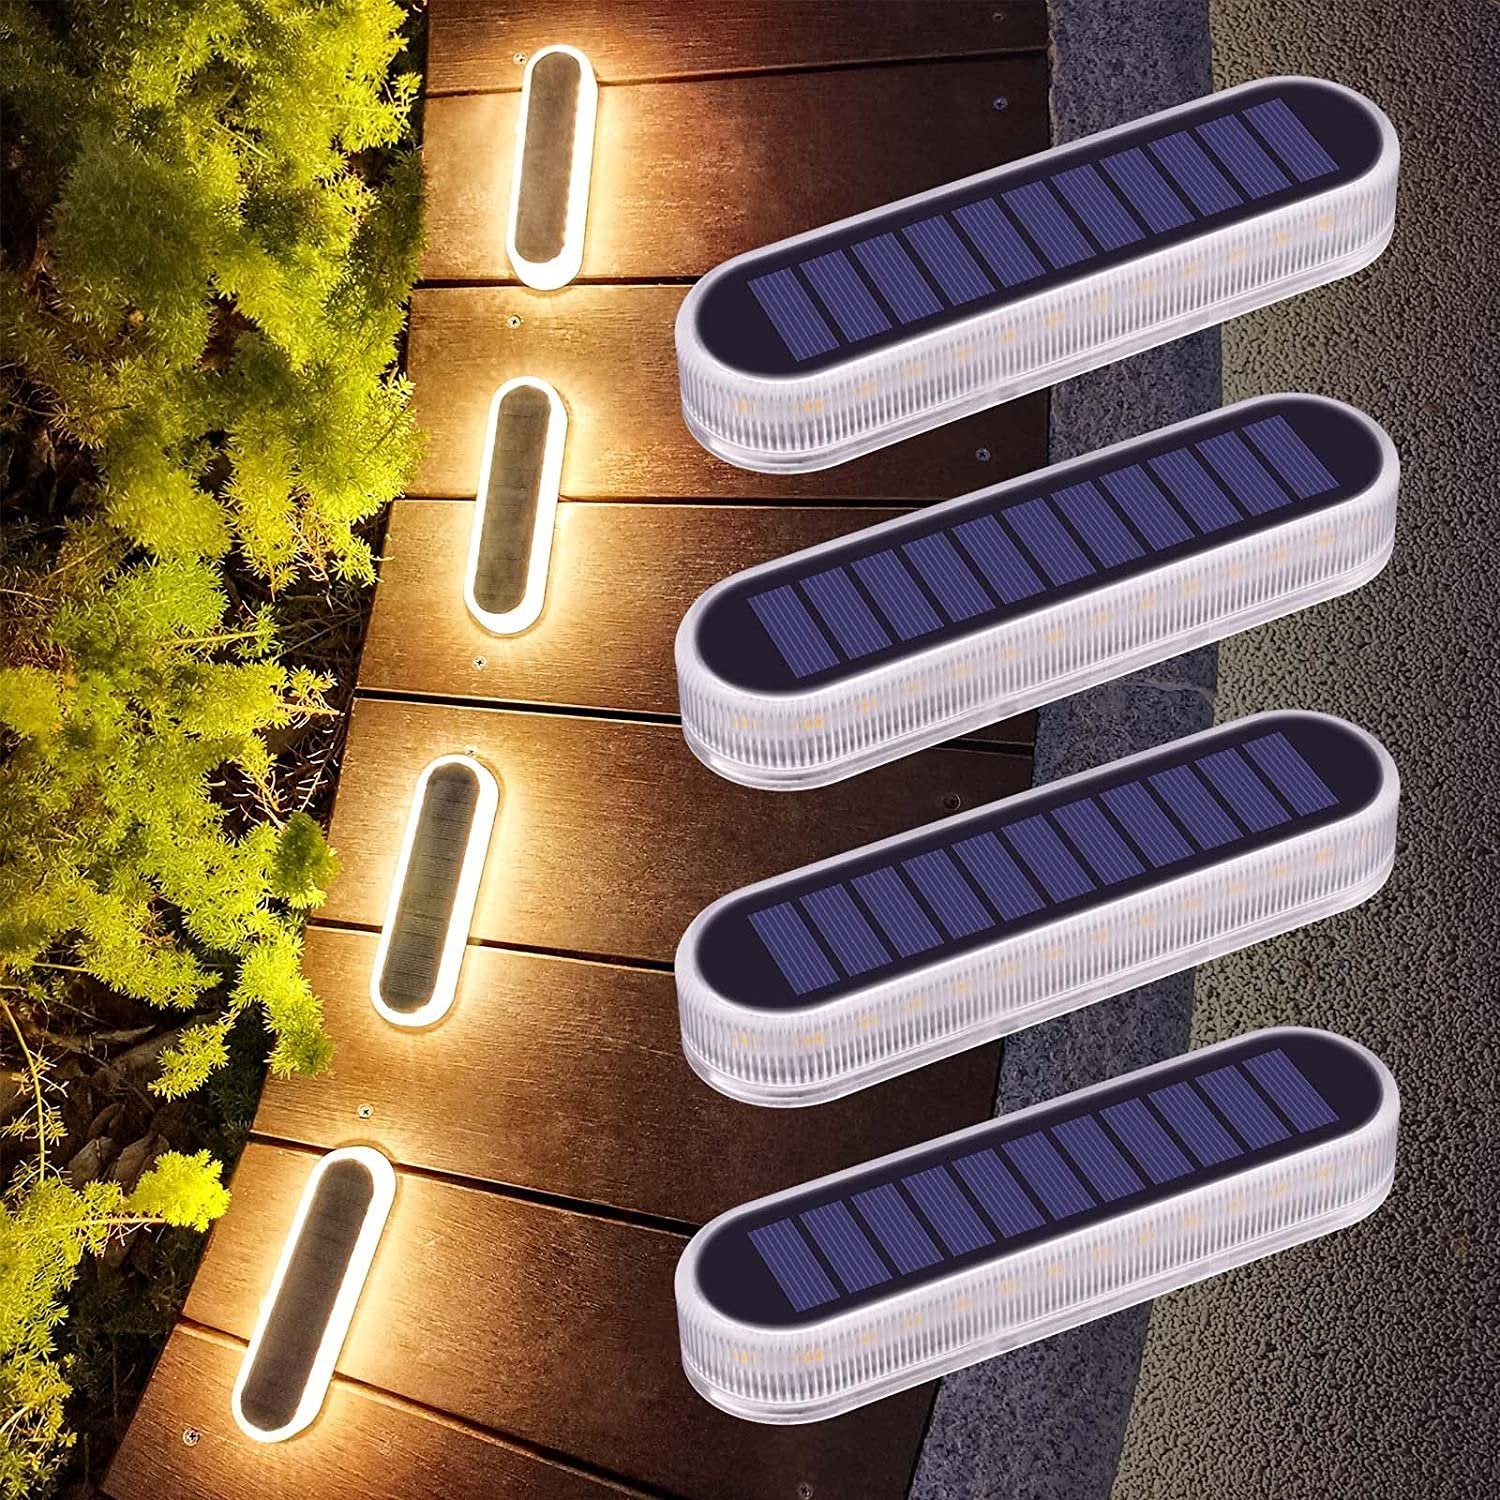 4-Pack Solar Powered Step Lights - 40LM Brightness, LED Dock Lights for Outdoor In-Ground Lighting, IP68 Waterproof with Auto ON/OFF Feature, Ideal for Garden, Stairs, Driveway, and Pathway Illumination - Office Catch